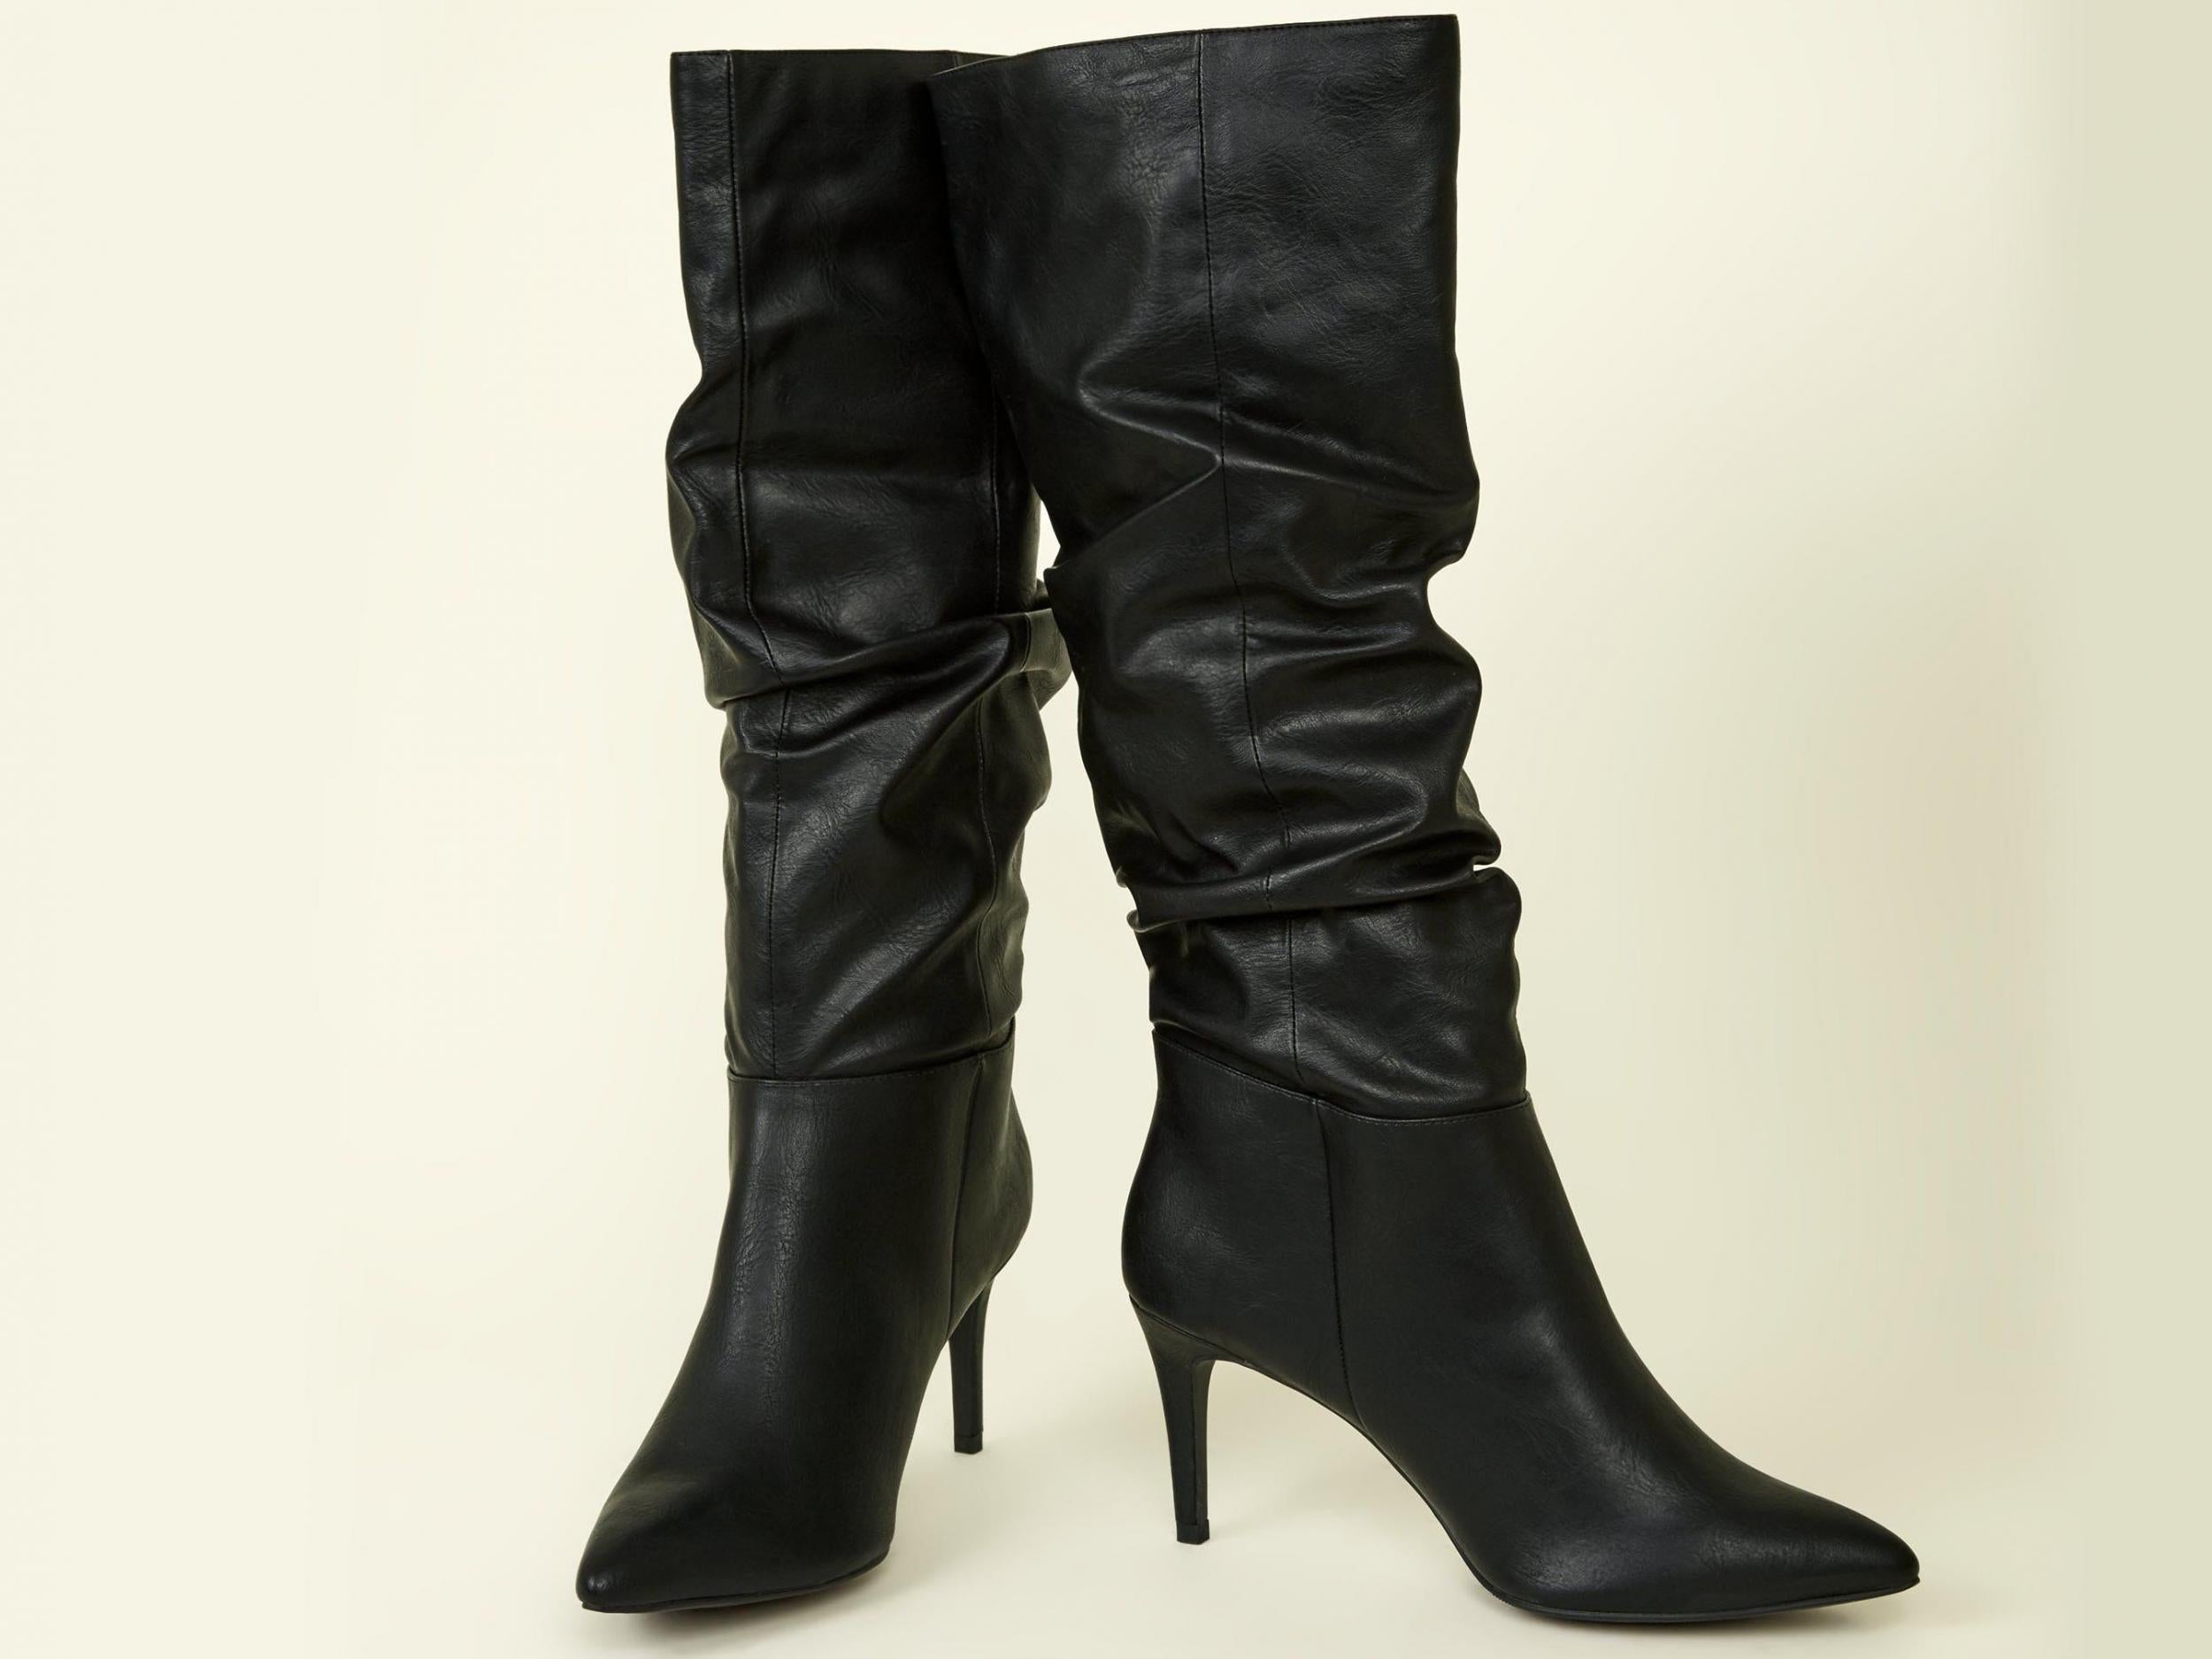 Black Leather-Look Knee High Stiletto Slouch Boots, £39.99, New Look